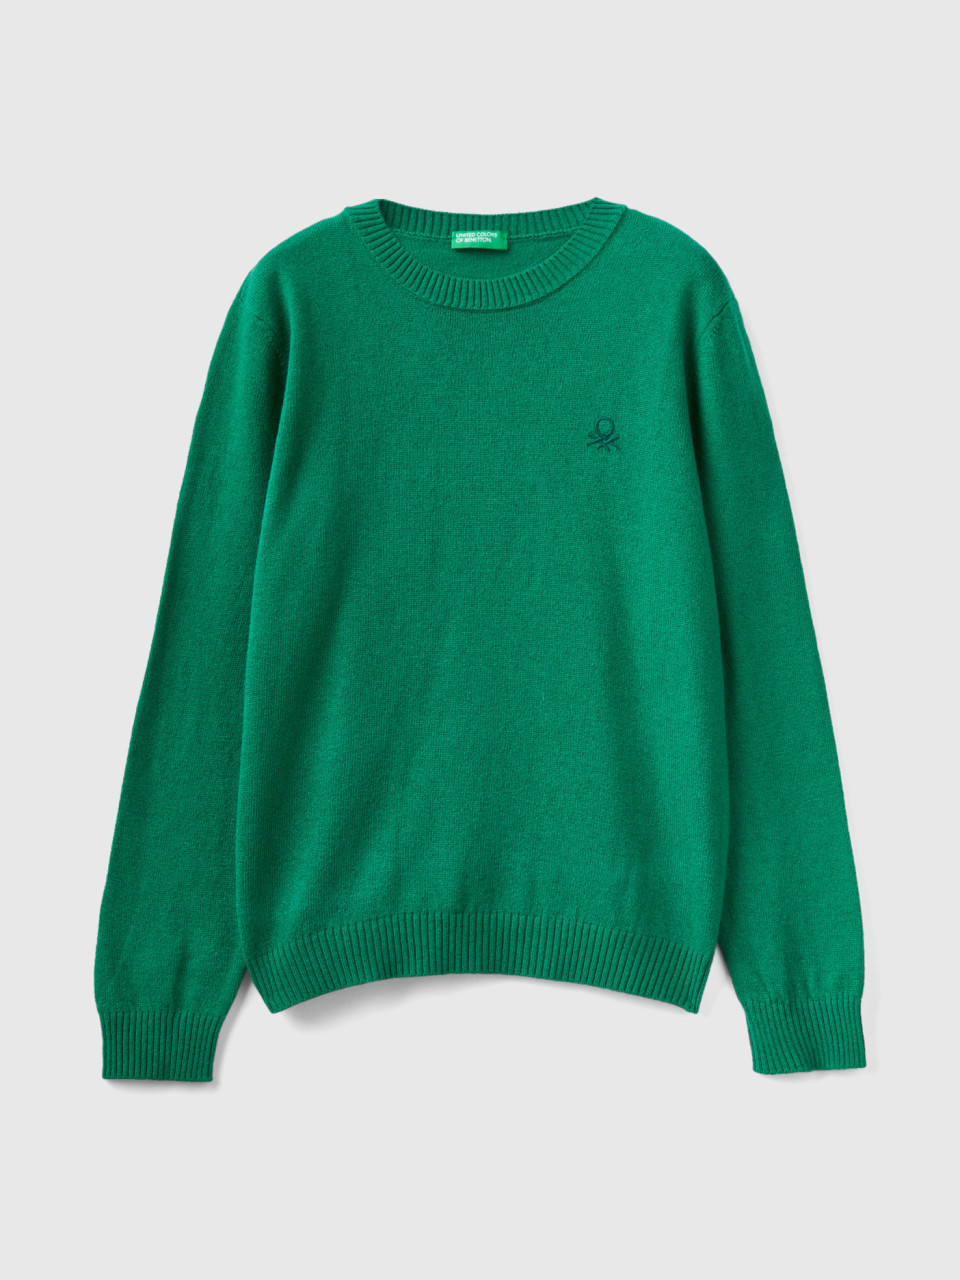 Benetton, Sweater In Cashmere And Wool Blend, Green, Kids